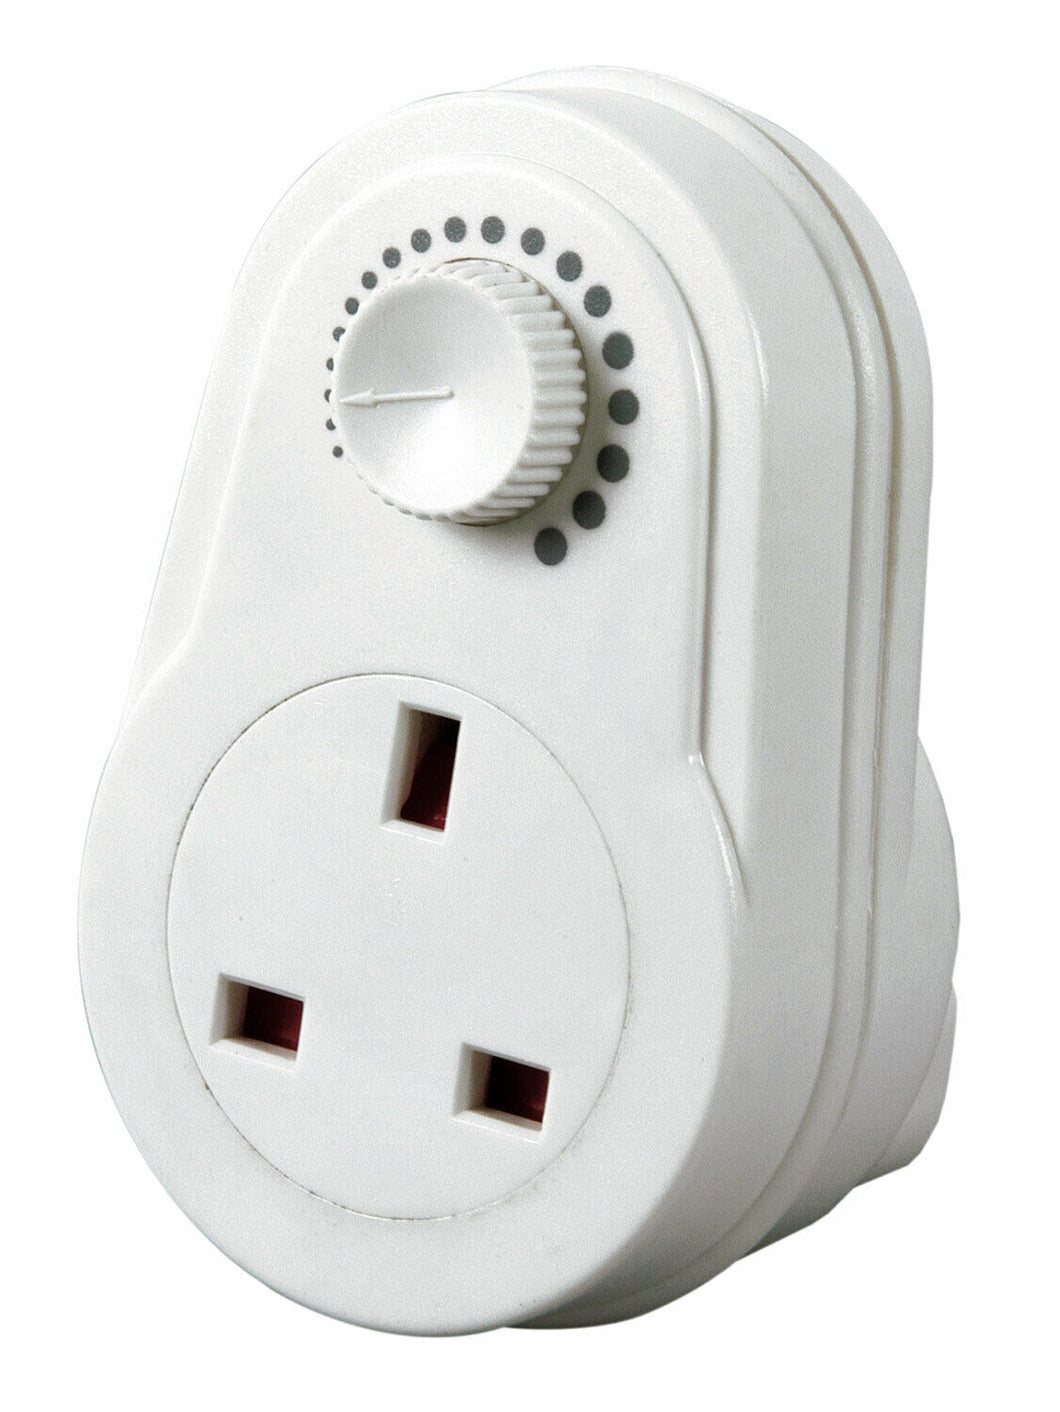 Plug-in Adjustable Dimmer Switch for Home Lamps